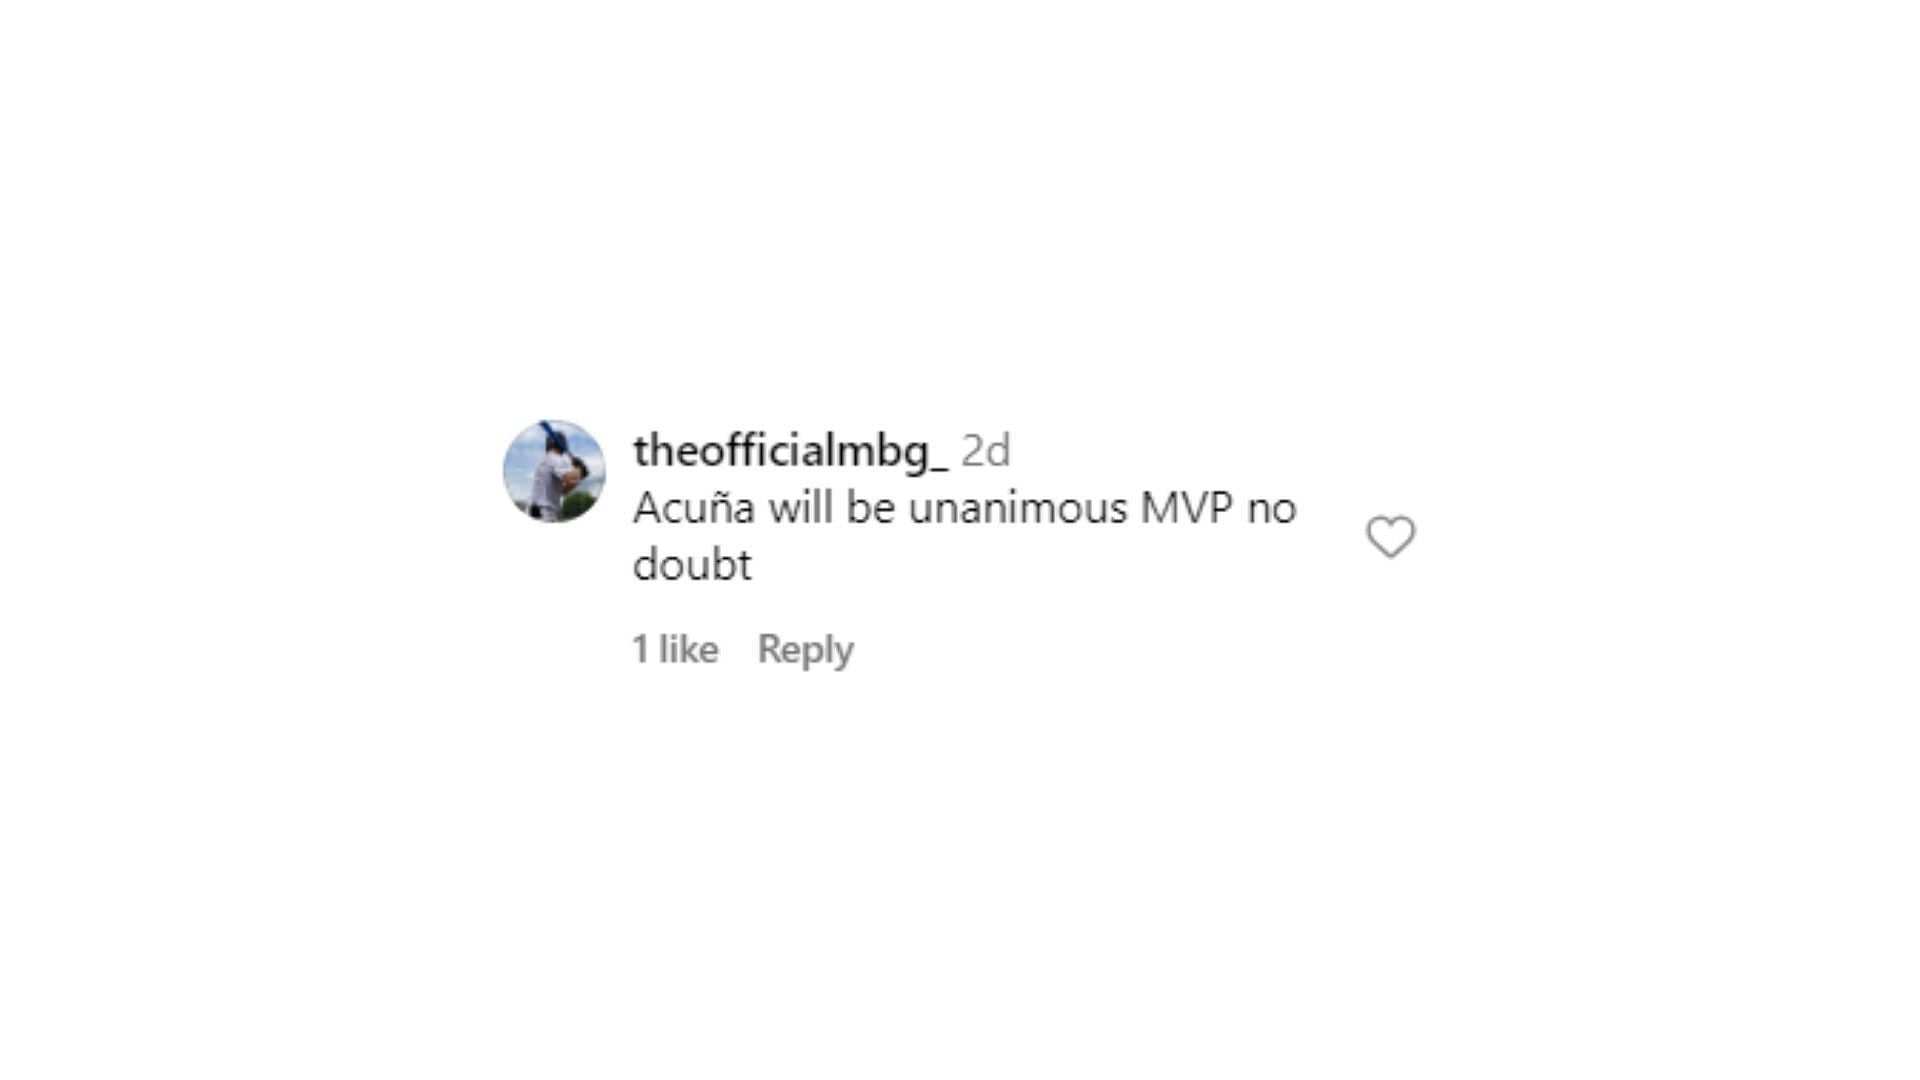 &quot;Acuna will be unanimous MVP no doubt&quot; - theofficialmbg_, Instagram.